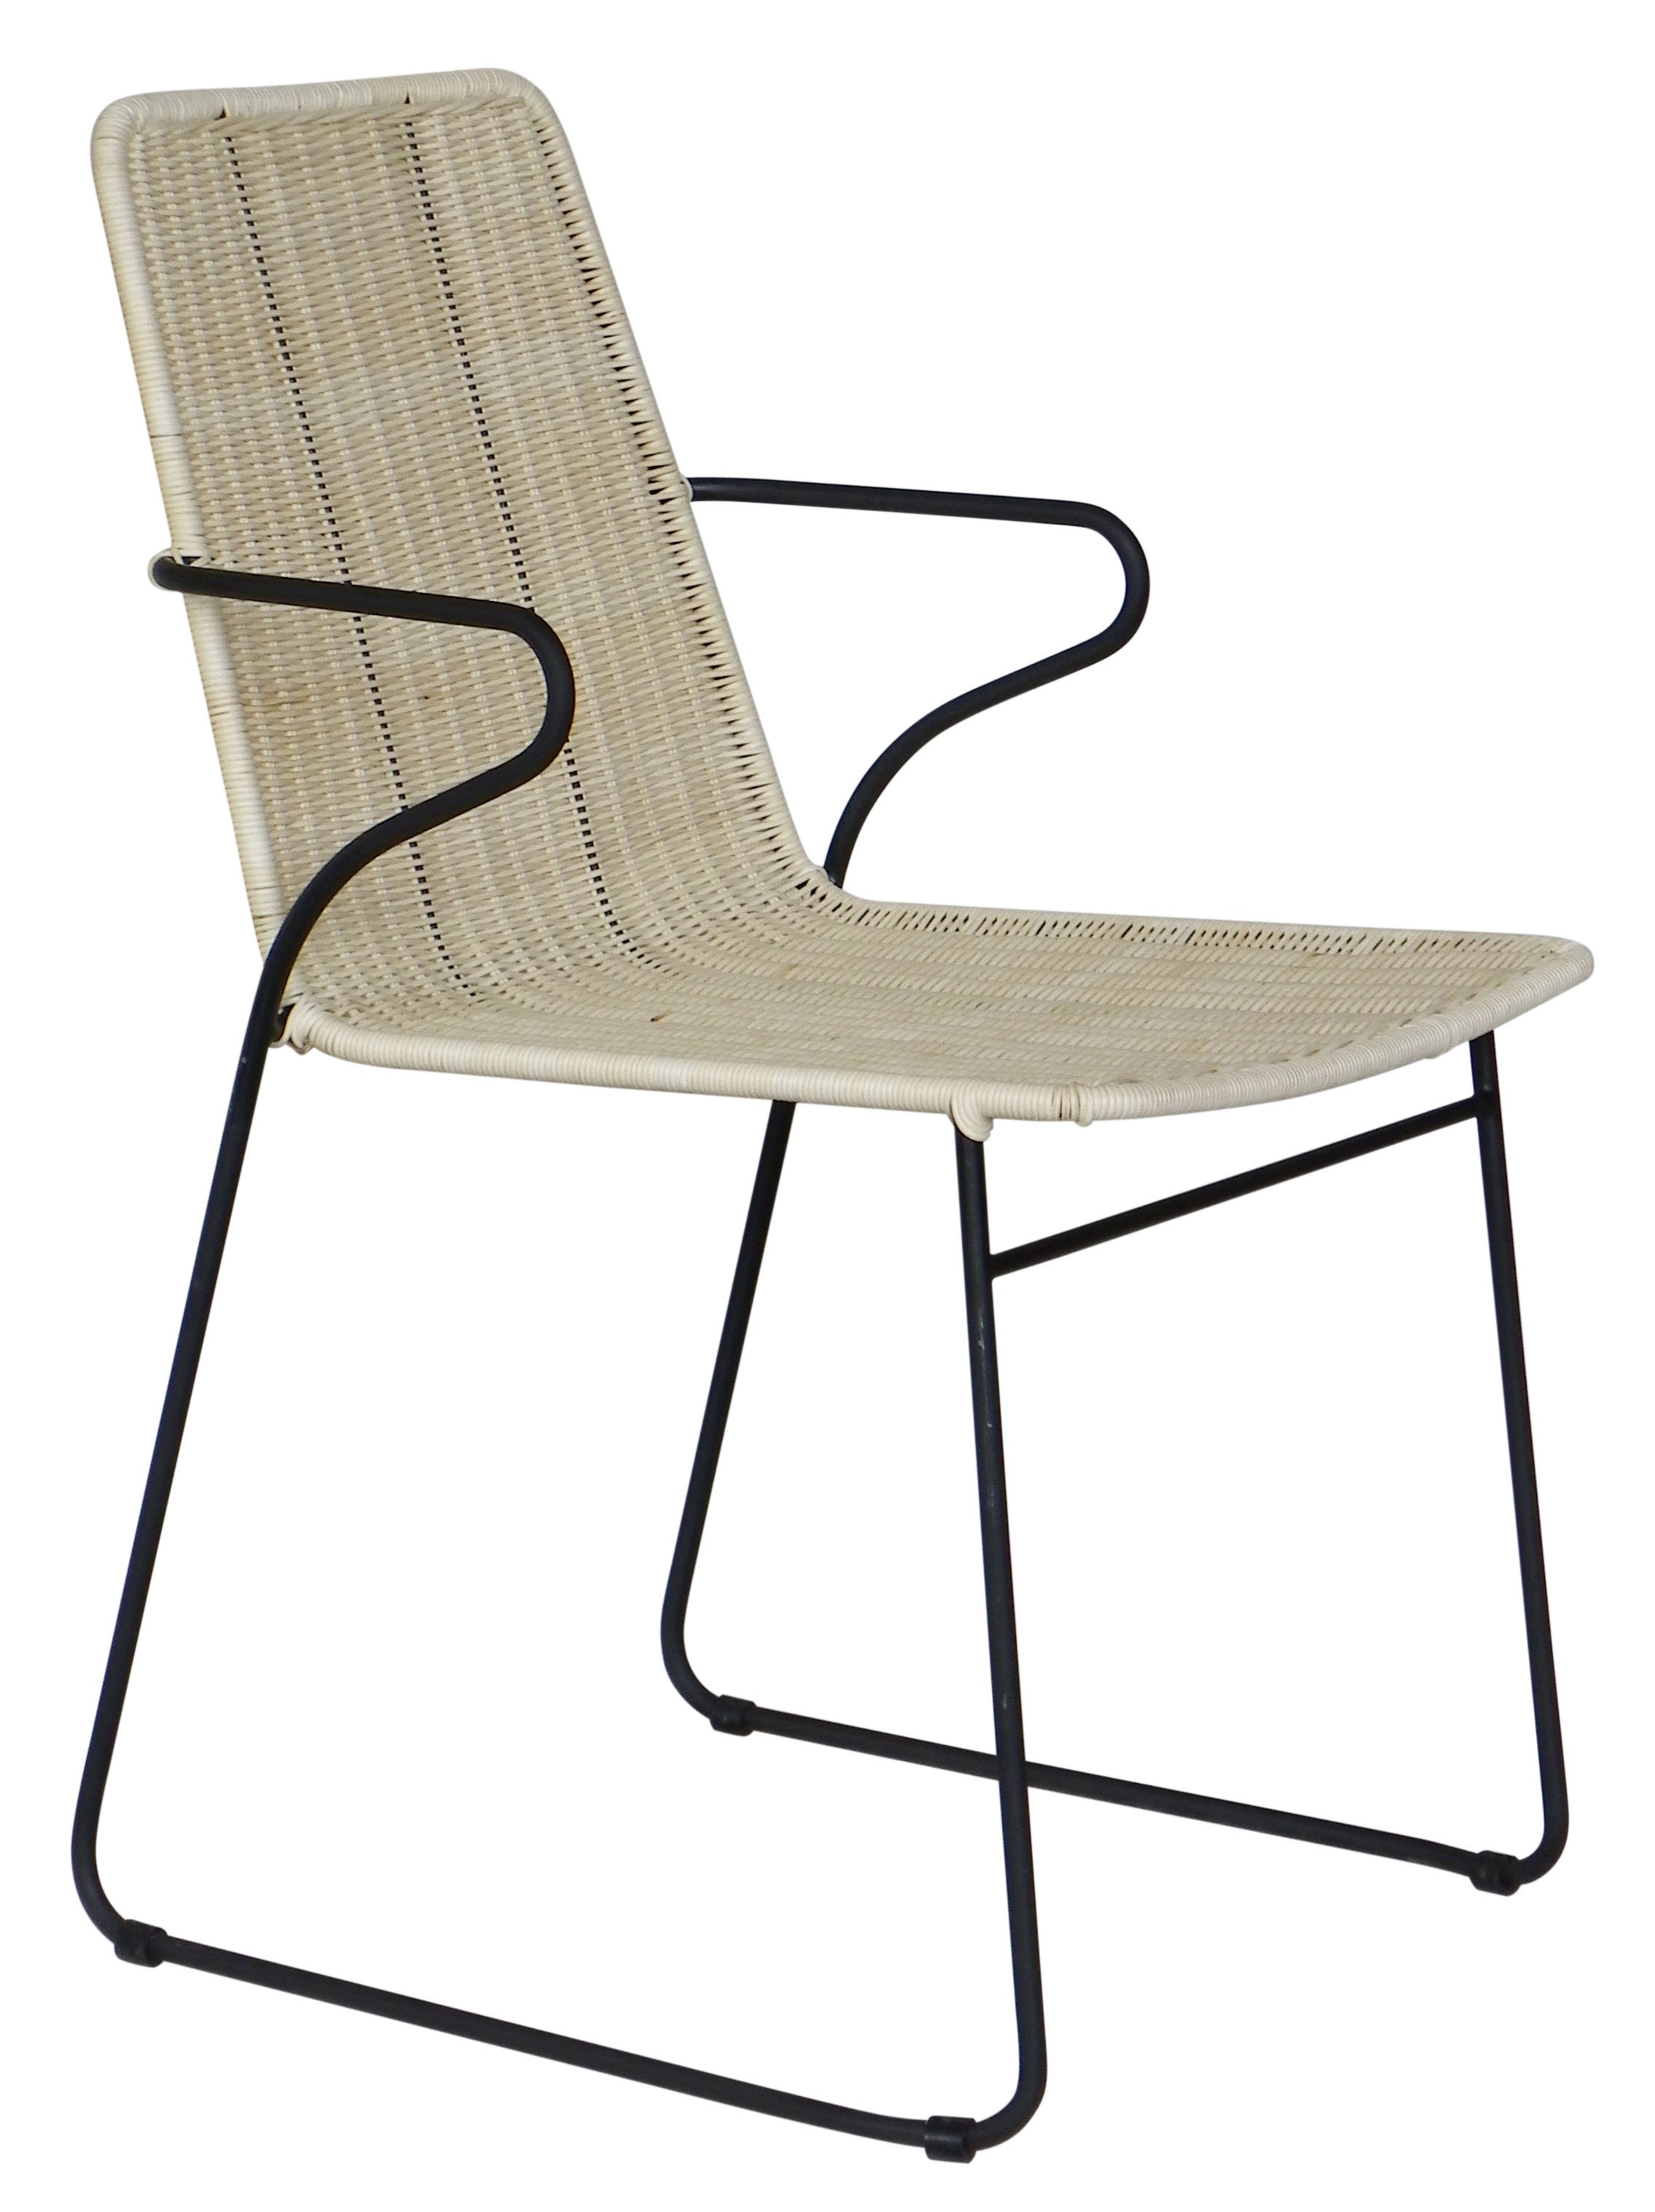 CARDIO DINING CHAIR IN WICKER